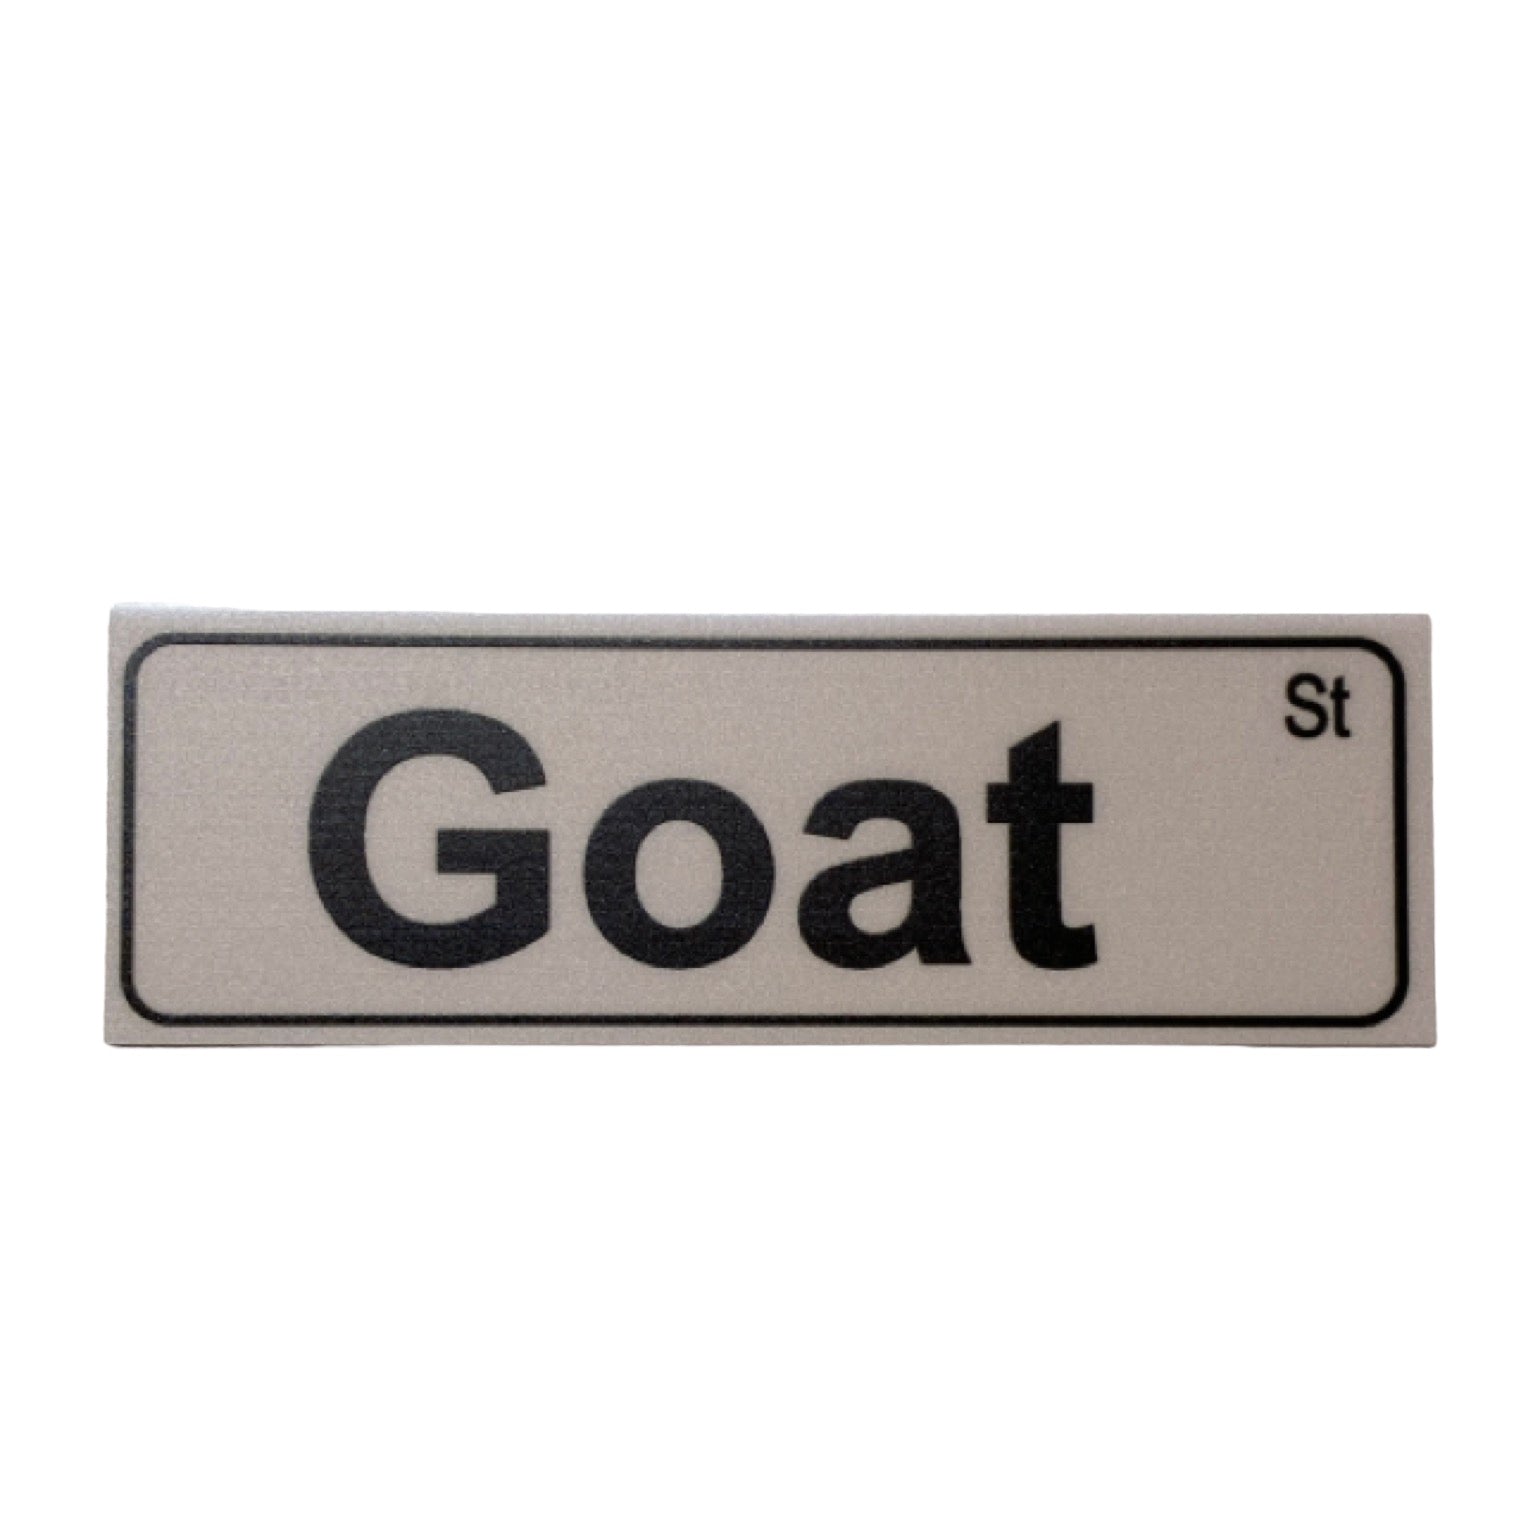 Goat Street Sign - The Renmy Store Homewares & Gifts 